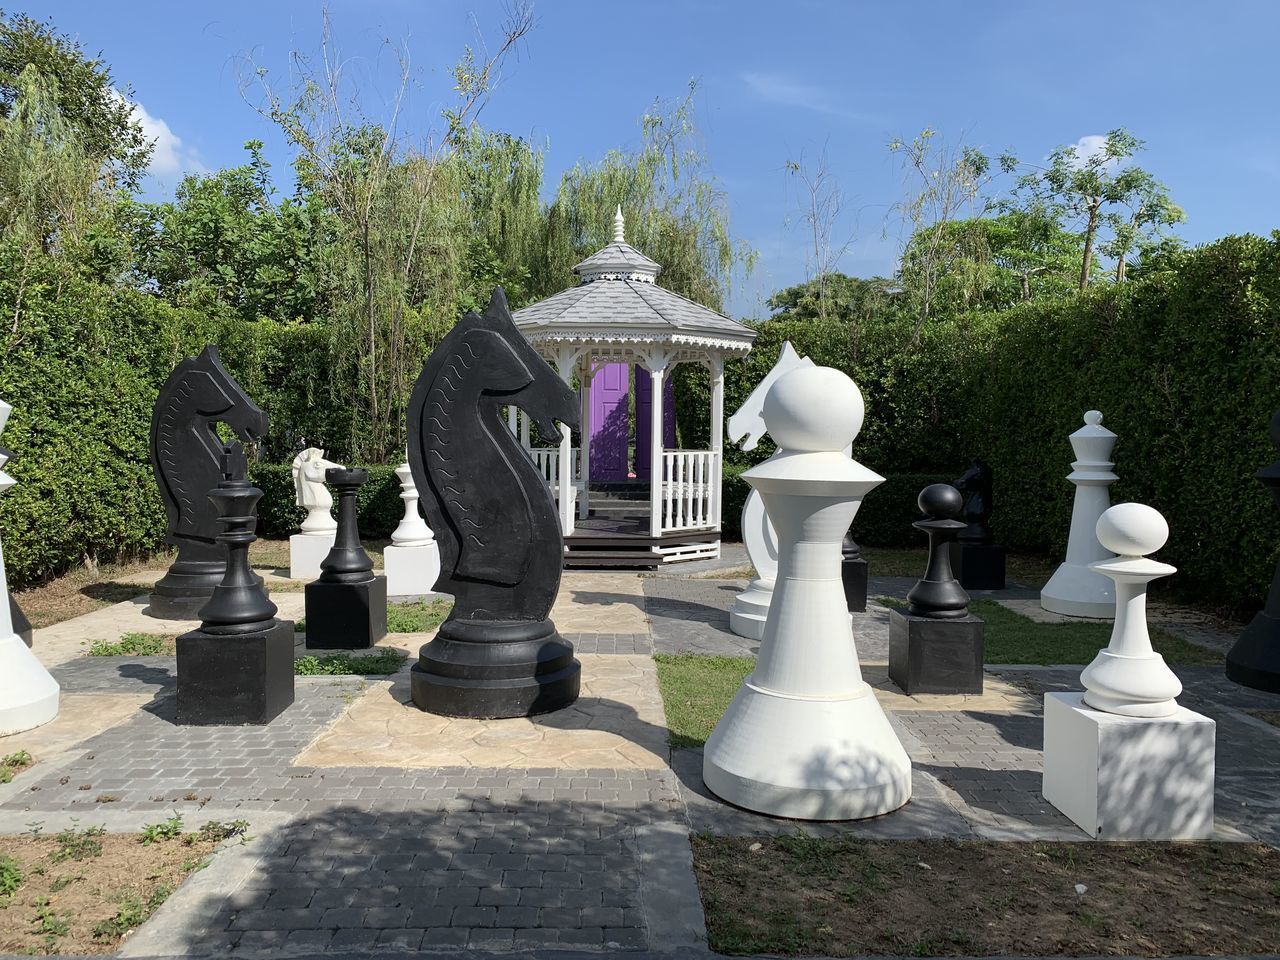 FULL FRAME SHOT OF CHESS PIECES ON TREE